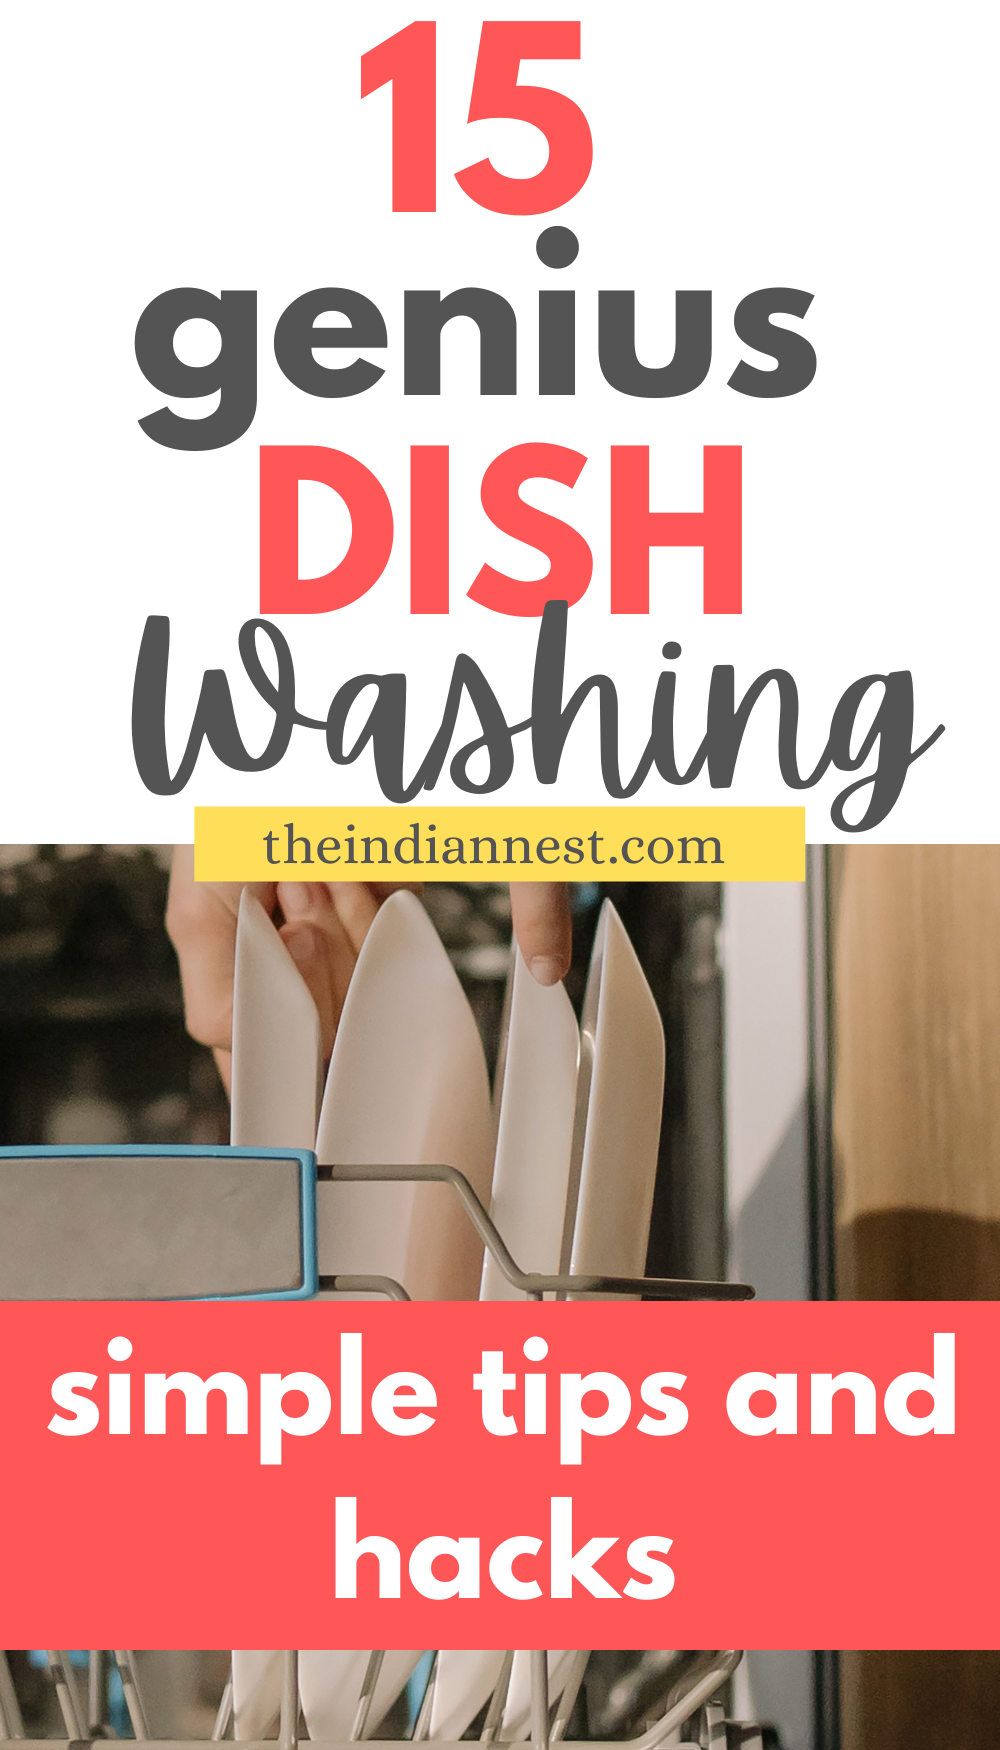 Tips to Make Washing Dishes Easier